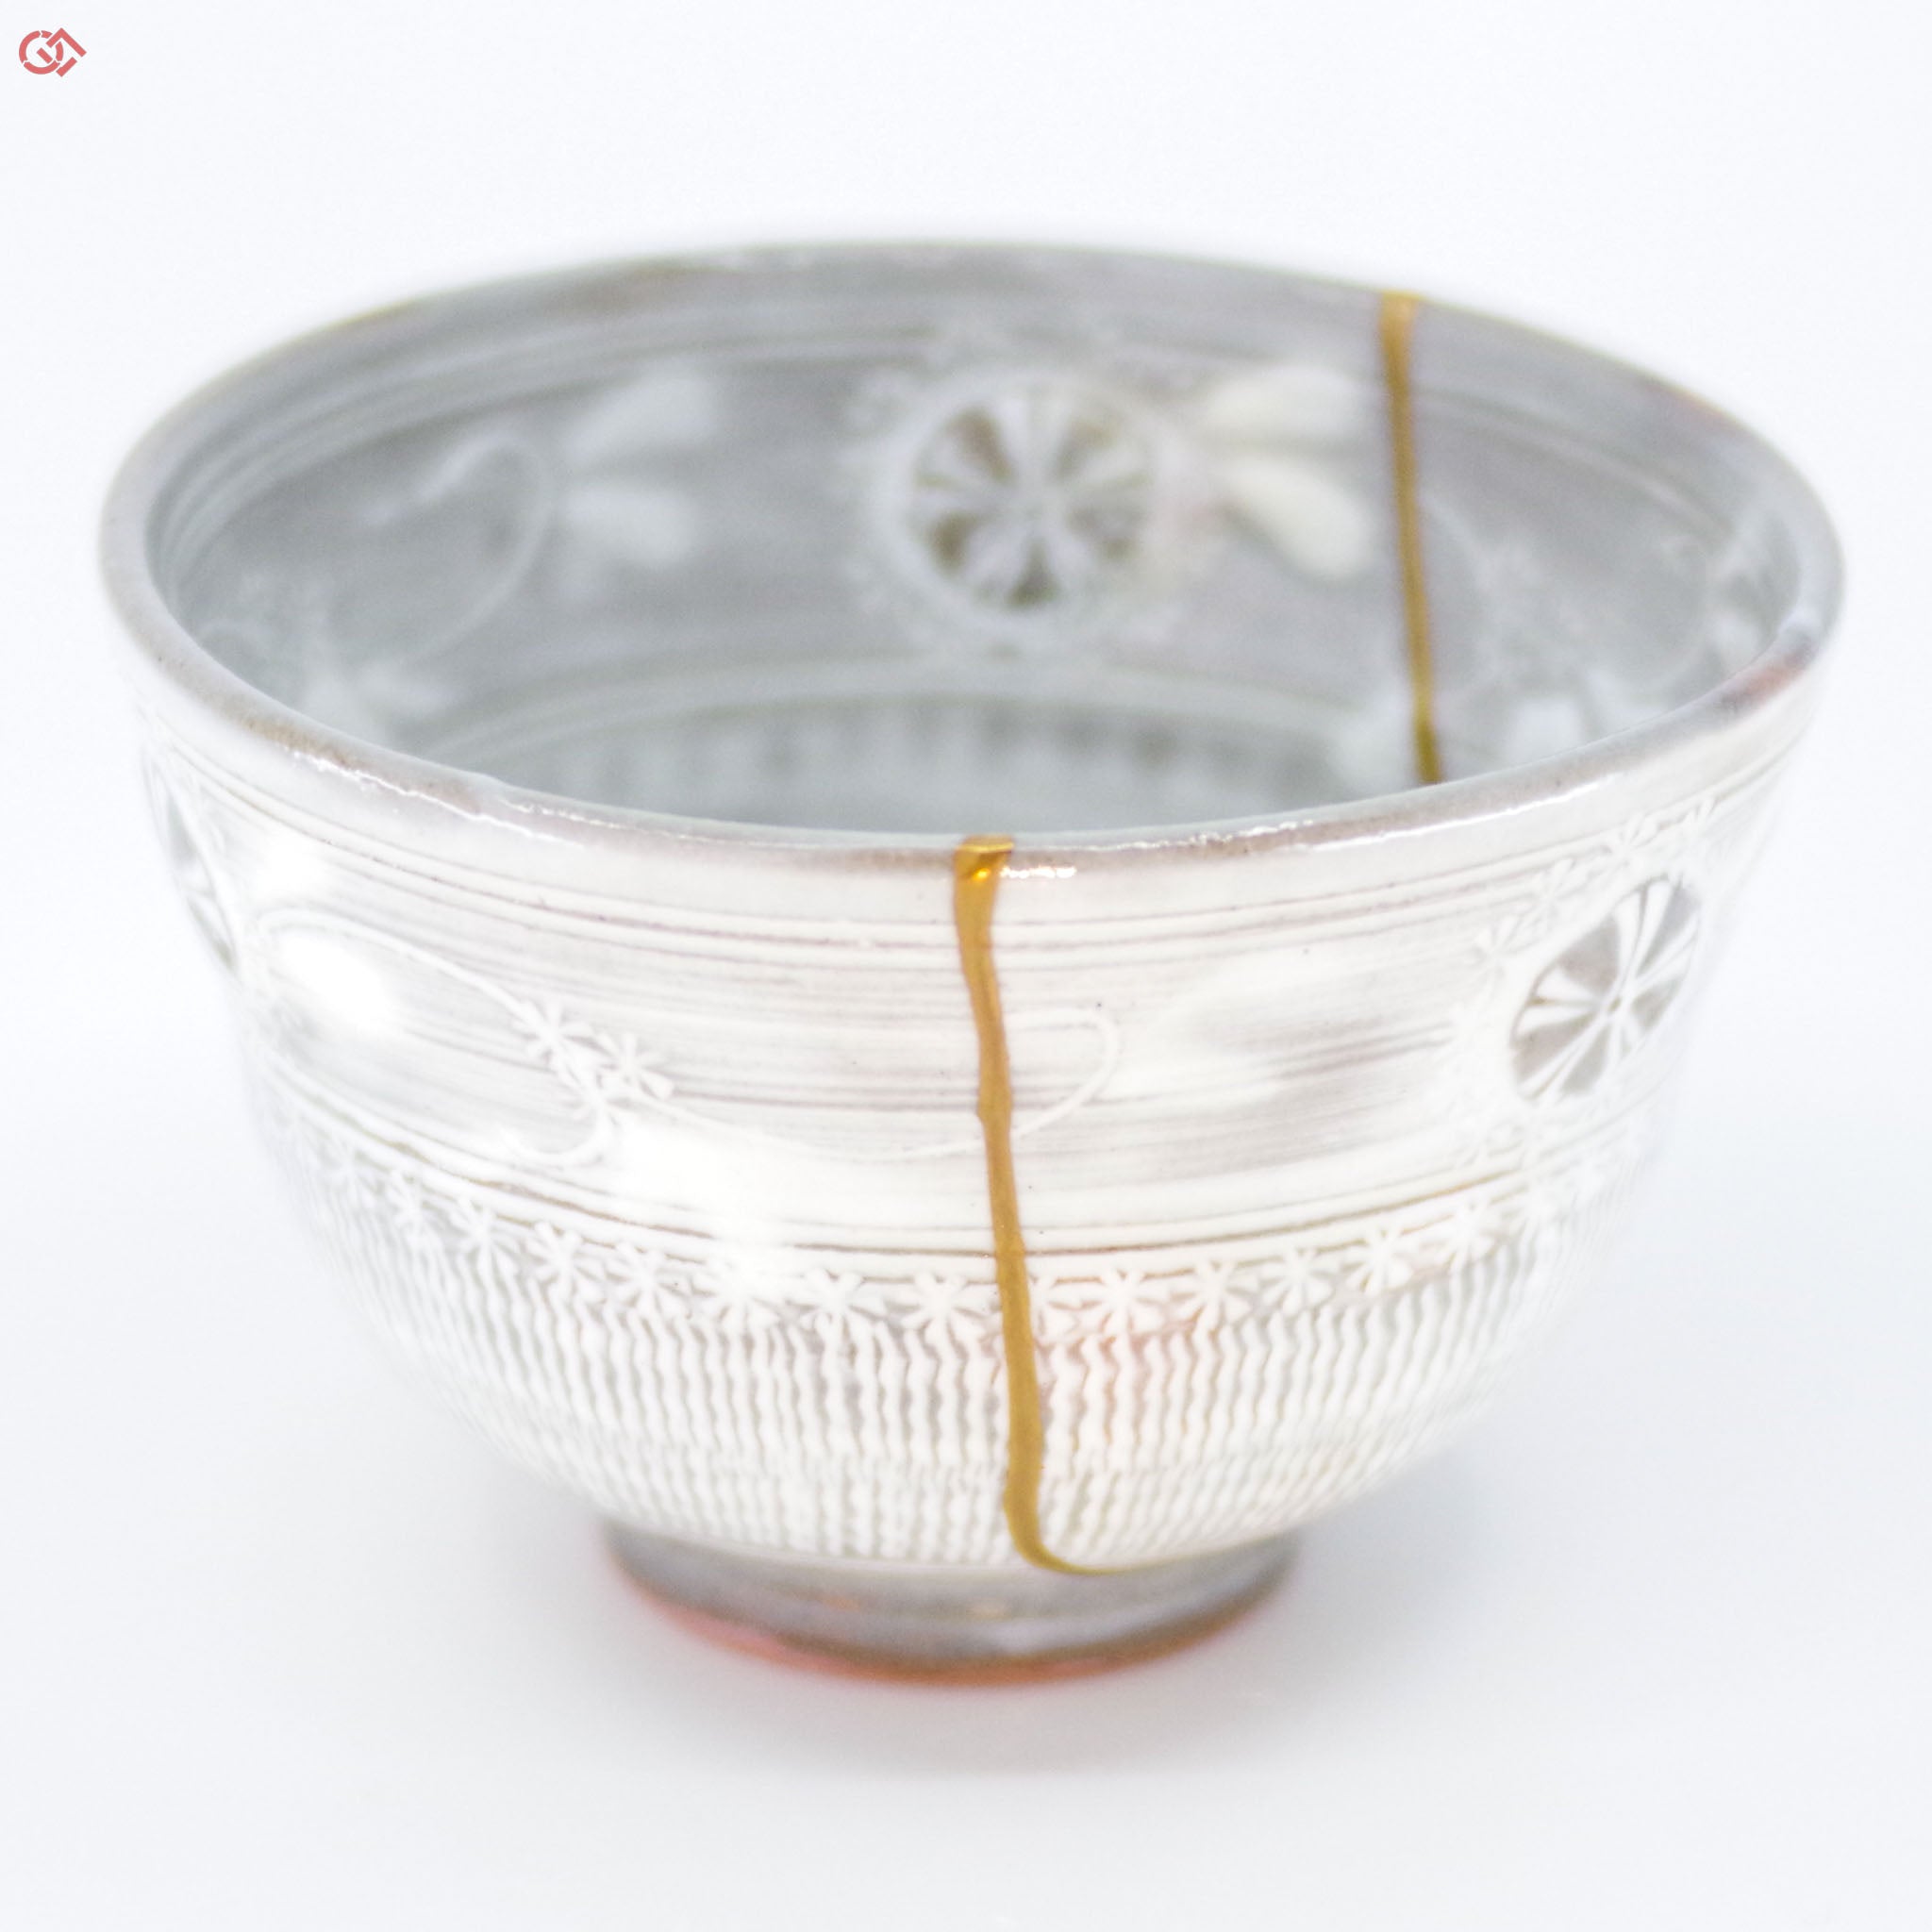 Enlarged view of Authentic Kintsugi pottery